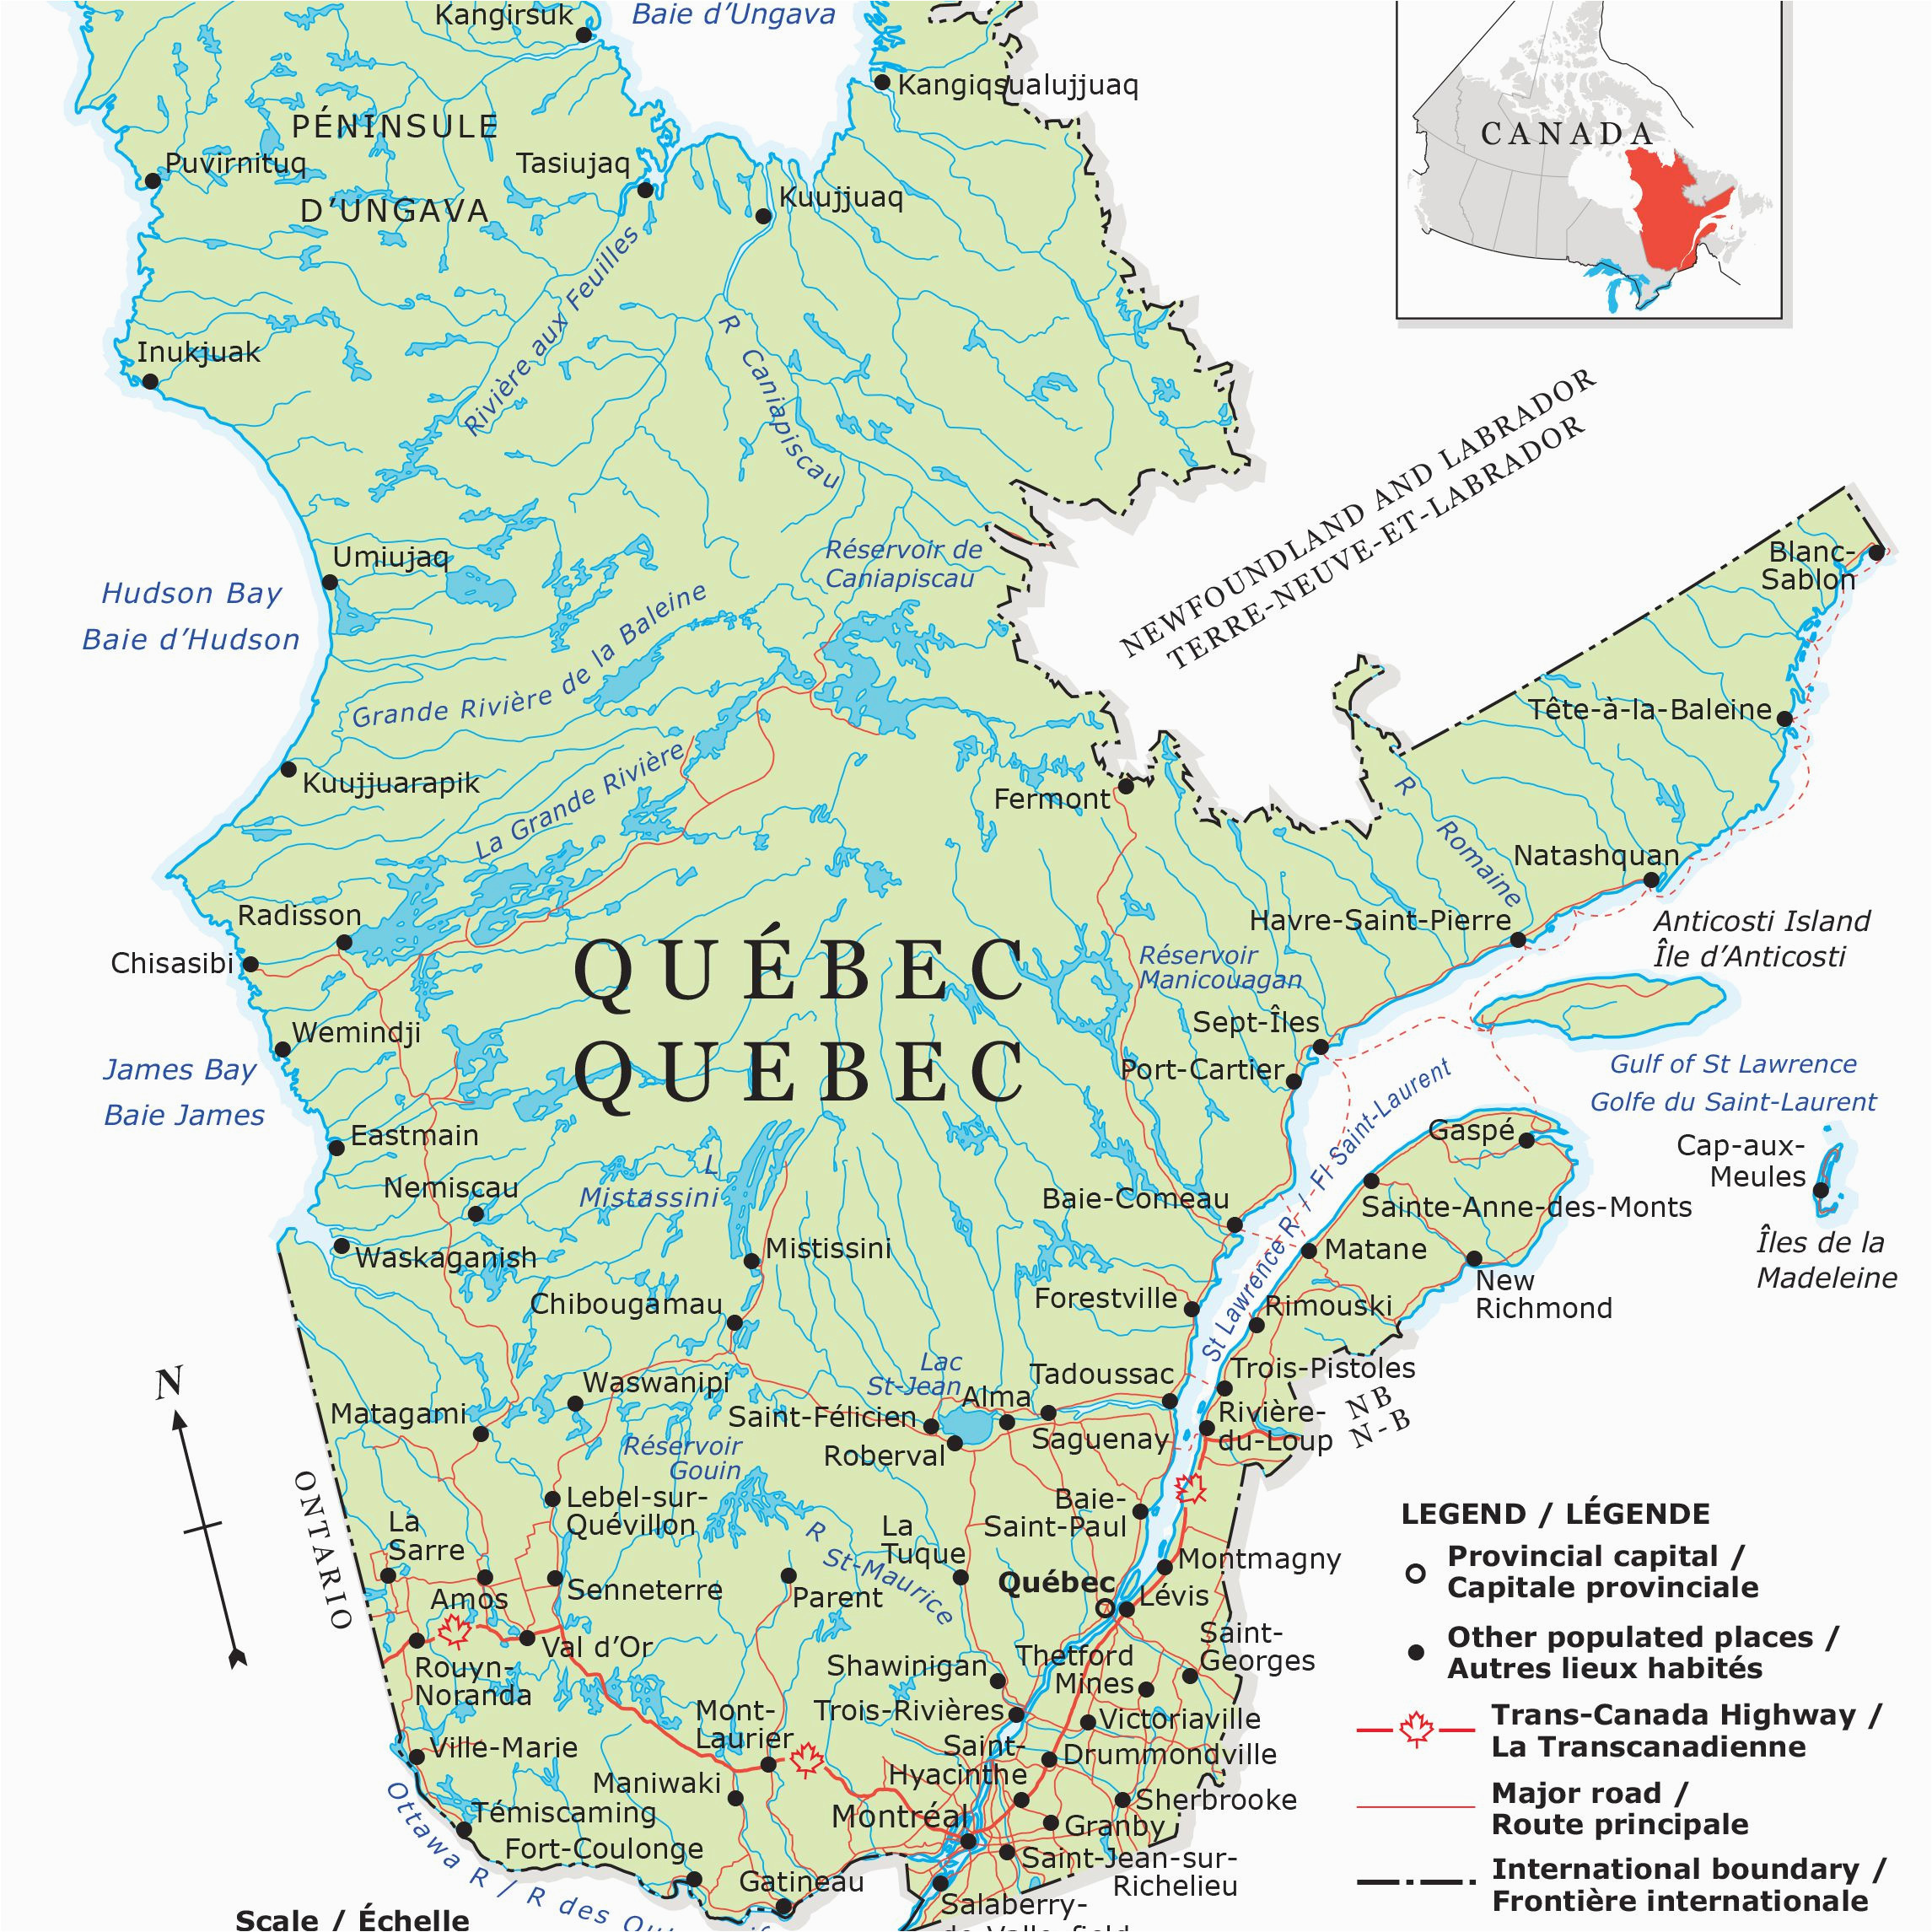 guide to canadian provinces and territories